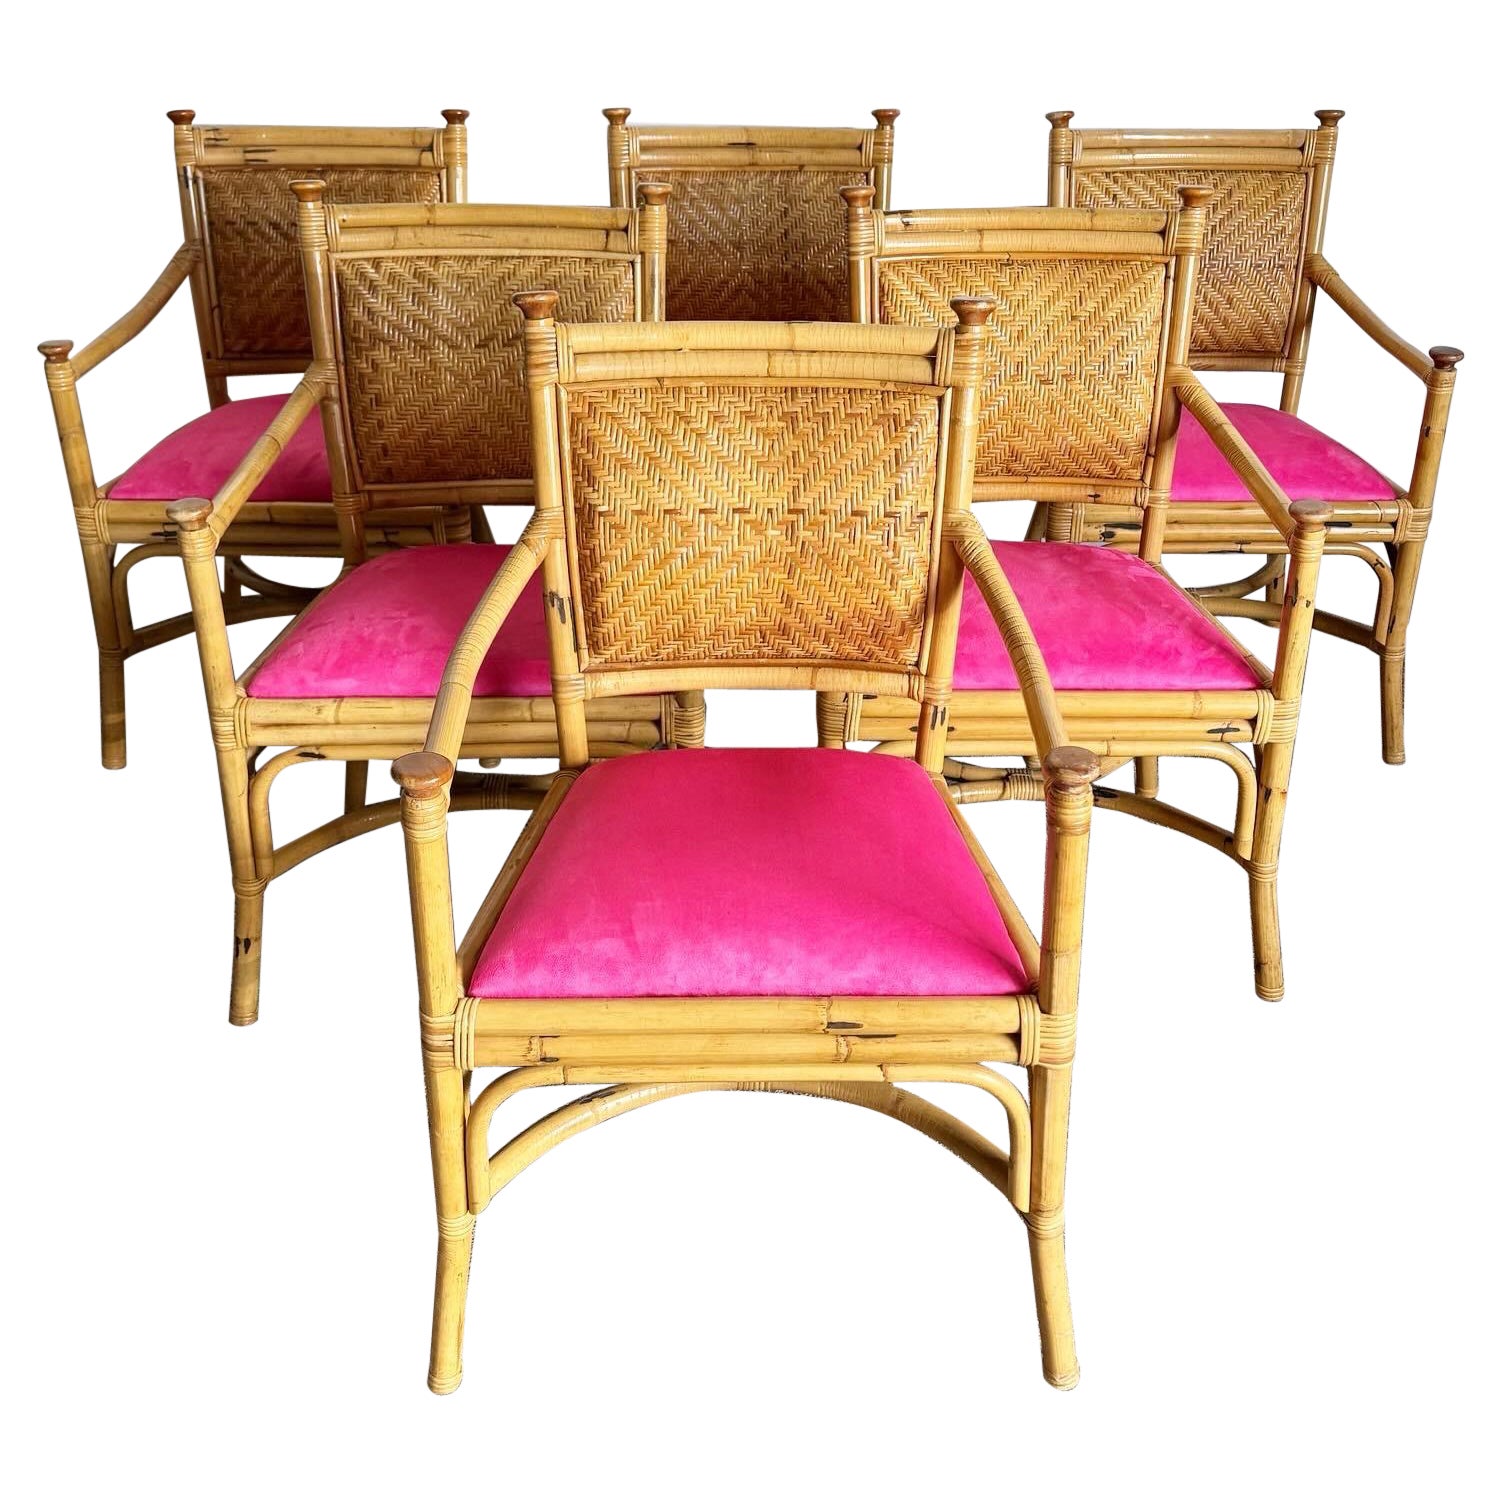 Boho Chic Wicker Rattan Bamboo Dining Arm Chairs With Hot Pink Cushions